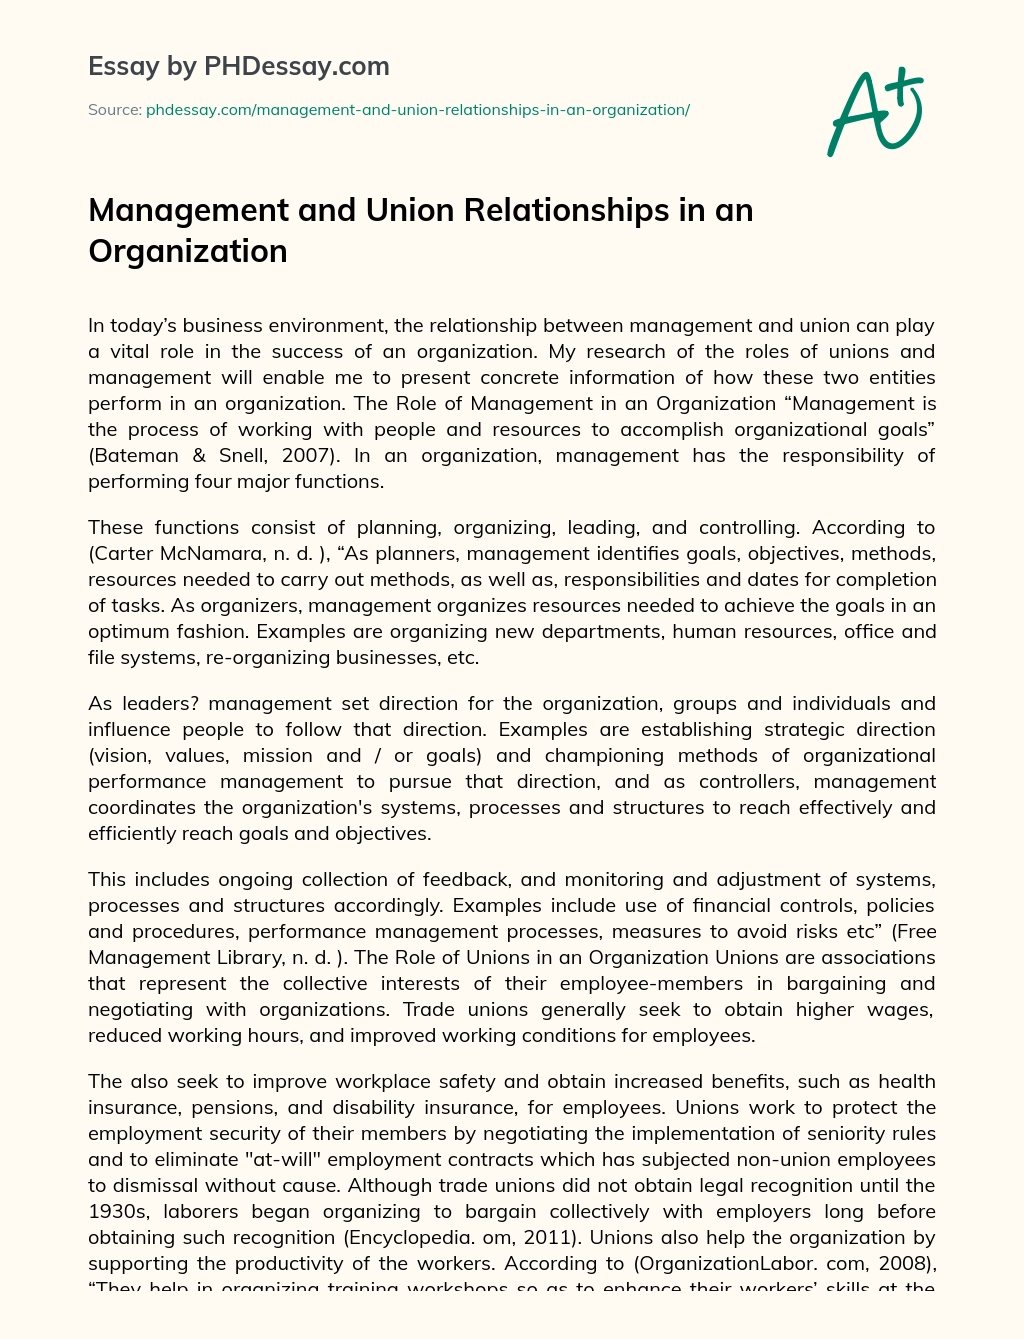 Management and Union Relationships in an Organization essay